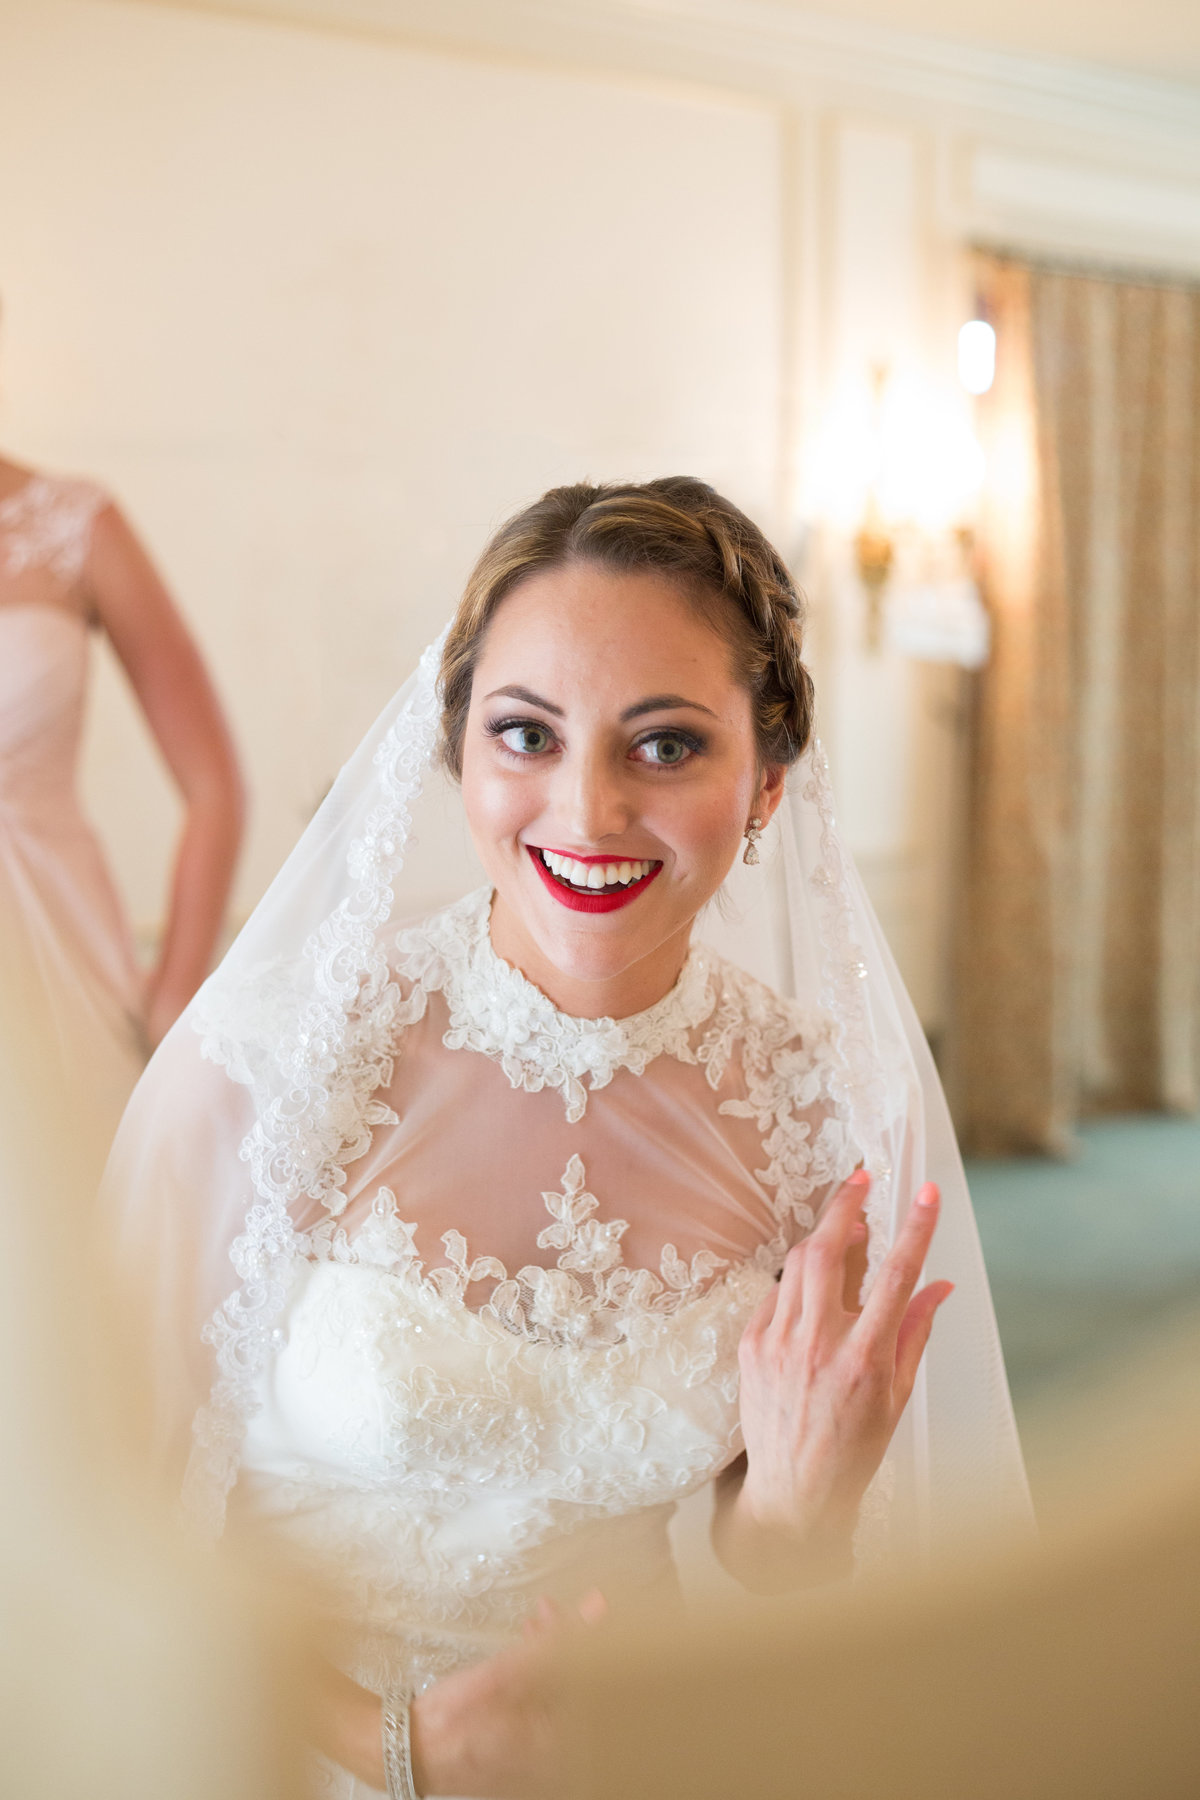 bride-getting-ready-vintage-inspired-wedding-halley-lutz-photography